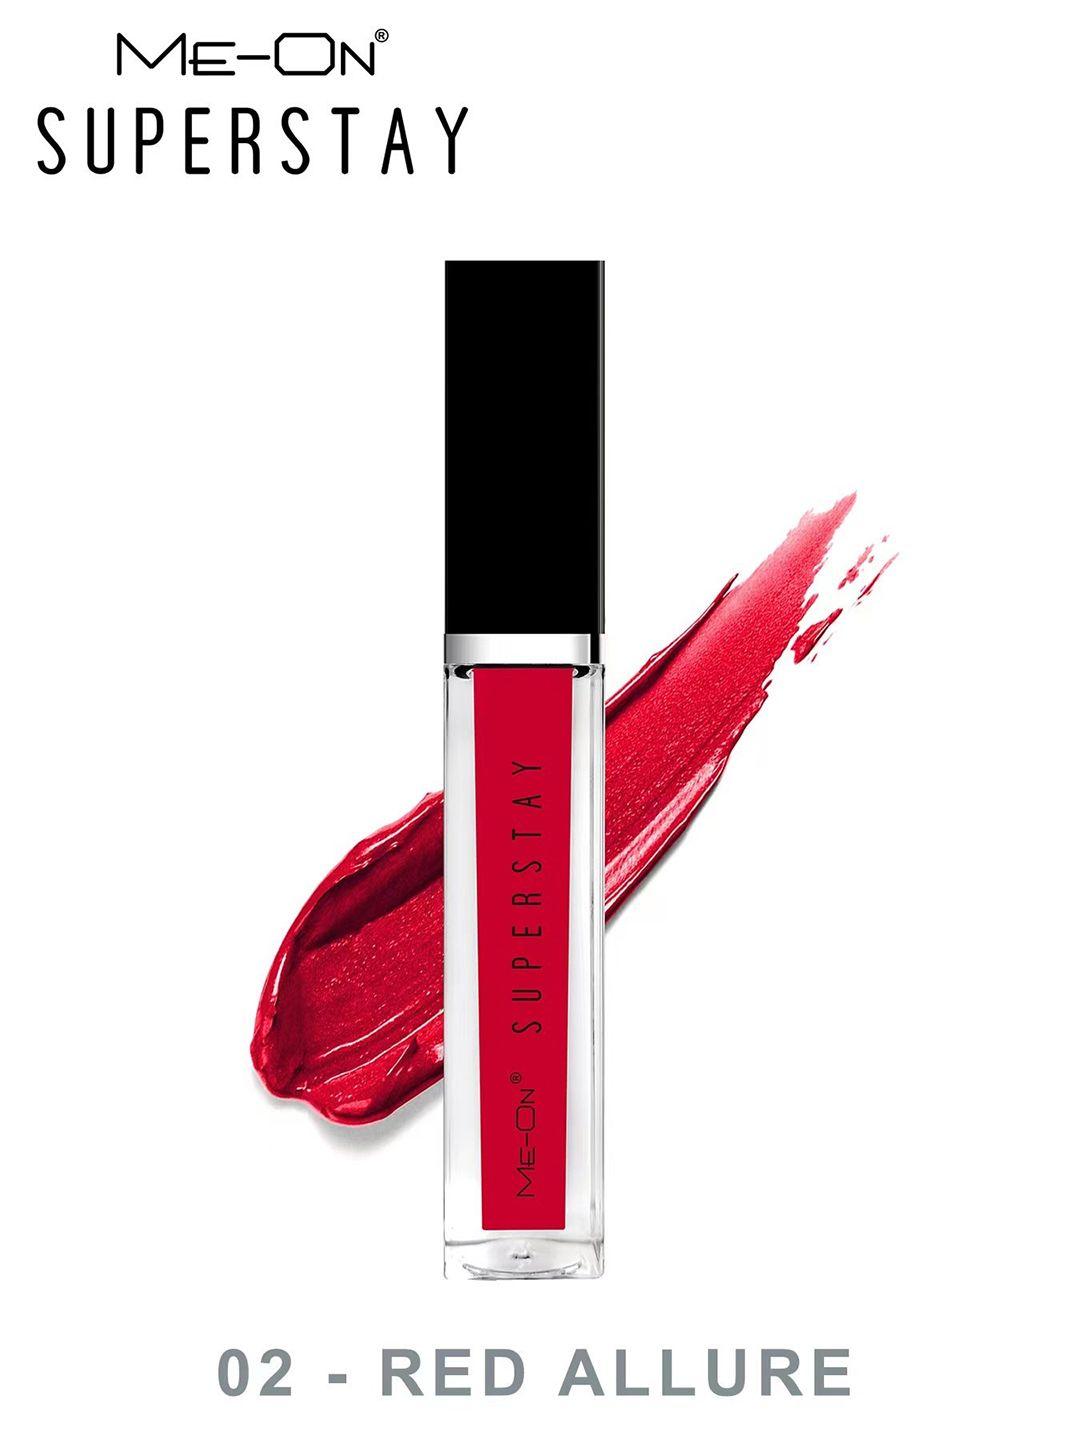 me-on waterproof 24hrs super stay lip gloss 6 ml - red allure 02